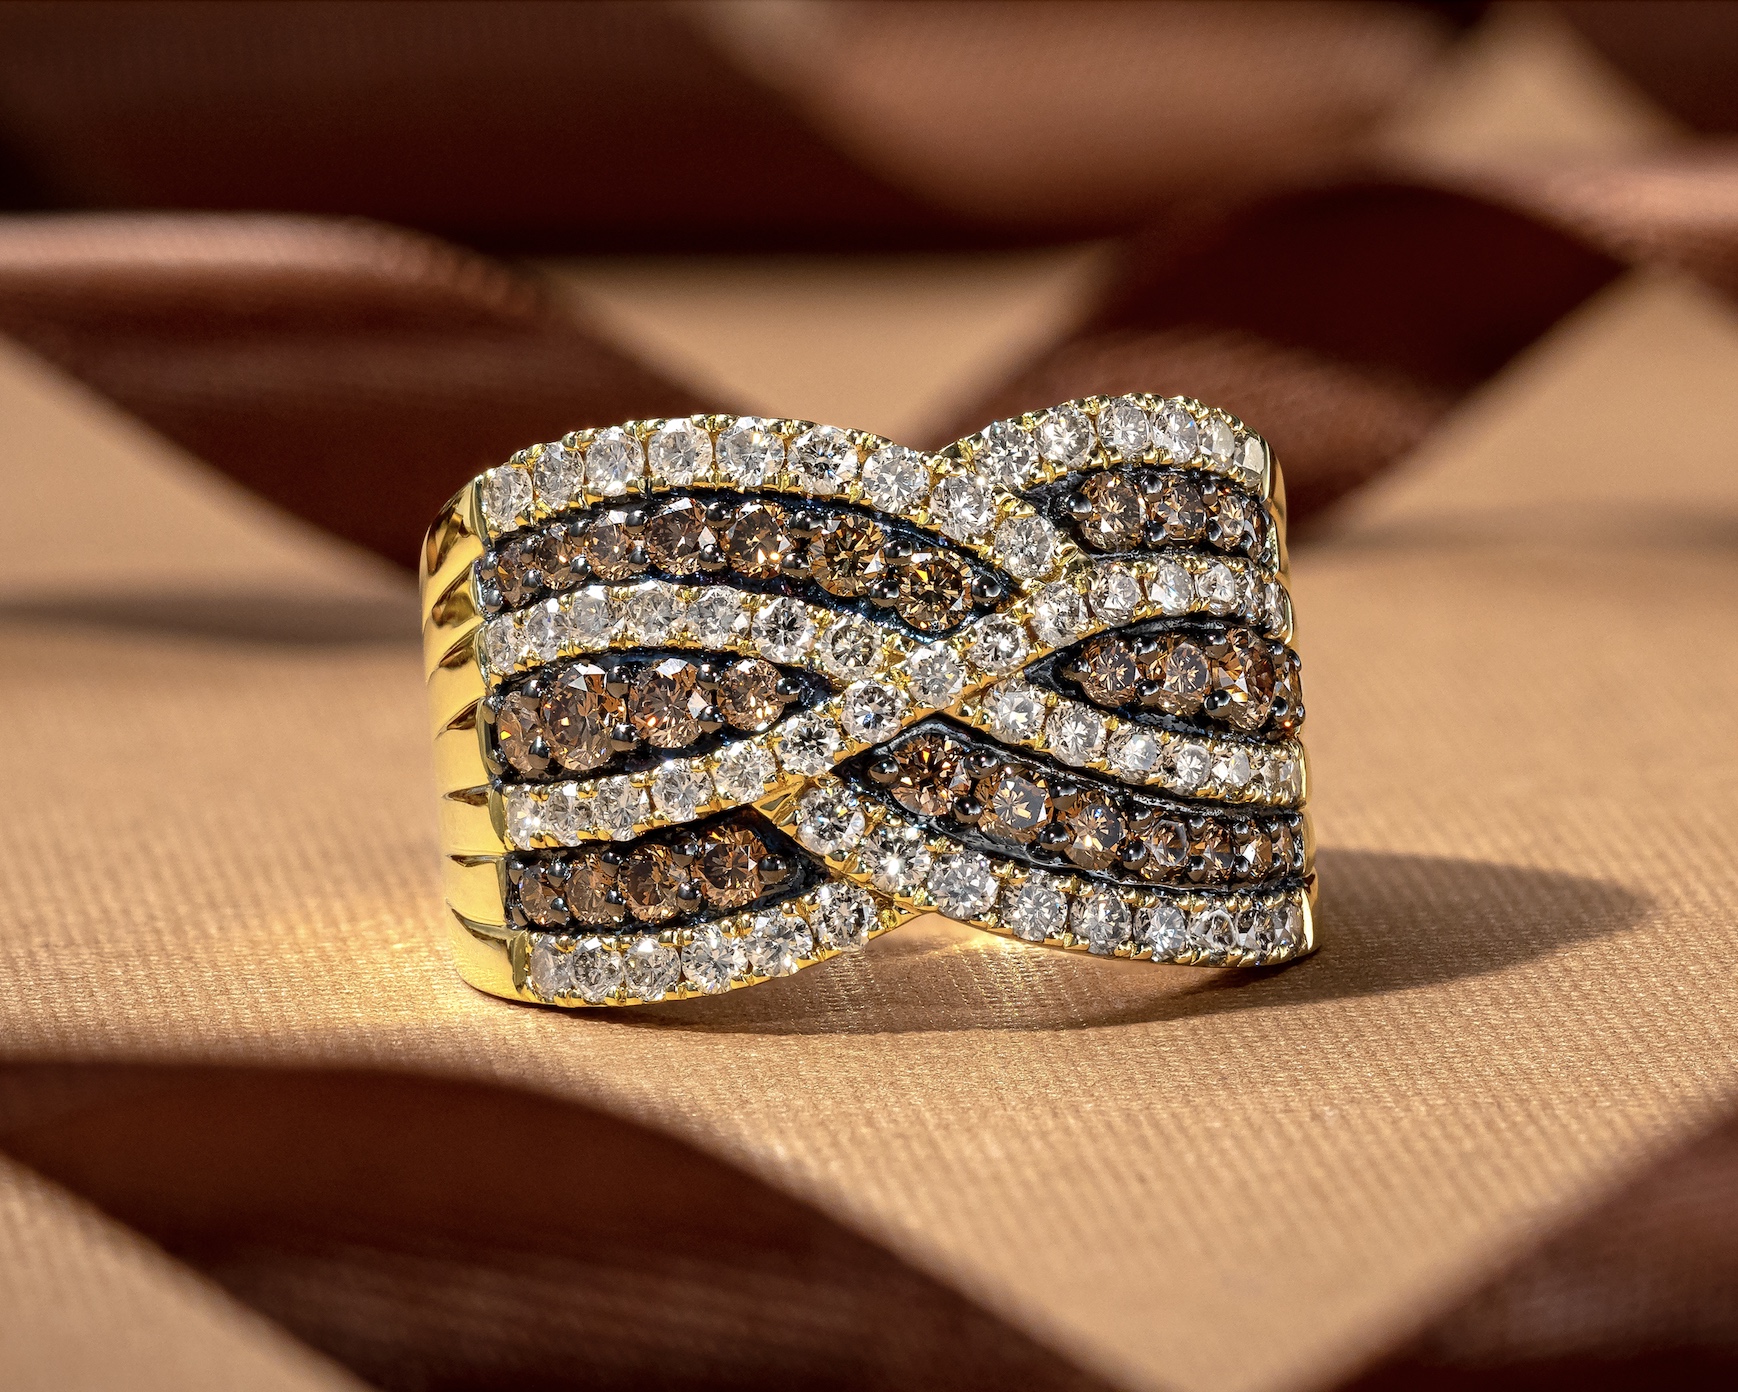 Indulge in the Le Vian Wrapped in Chocolate Collection at Jared